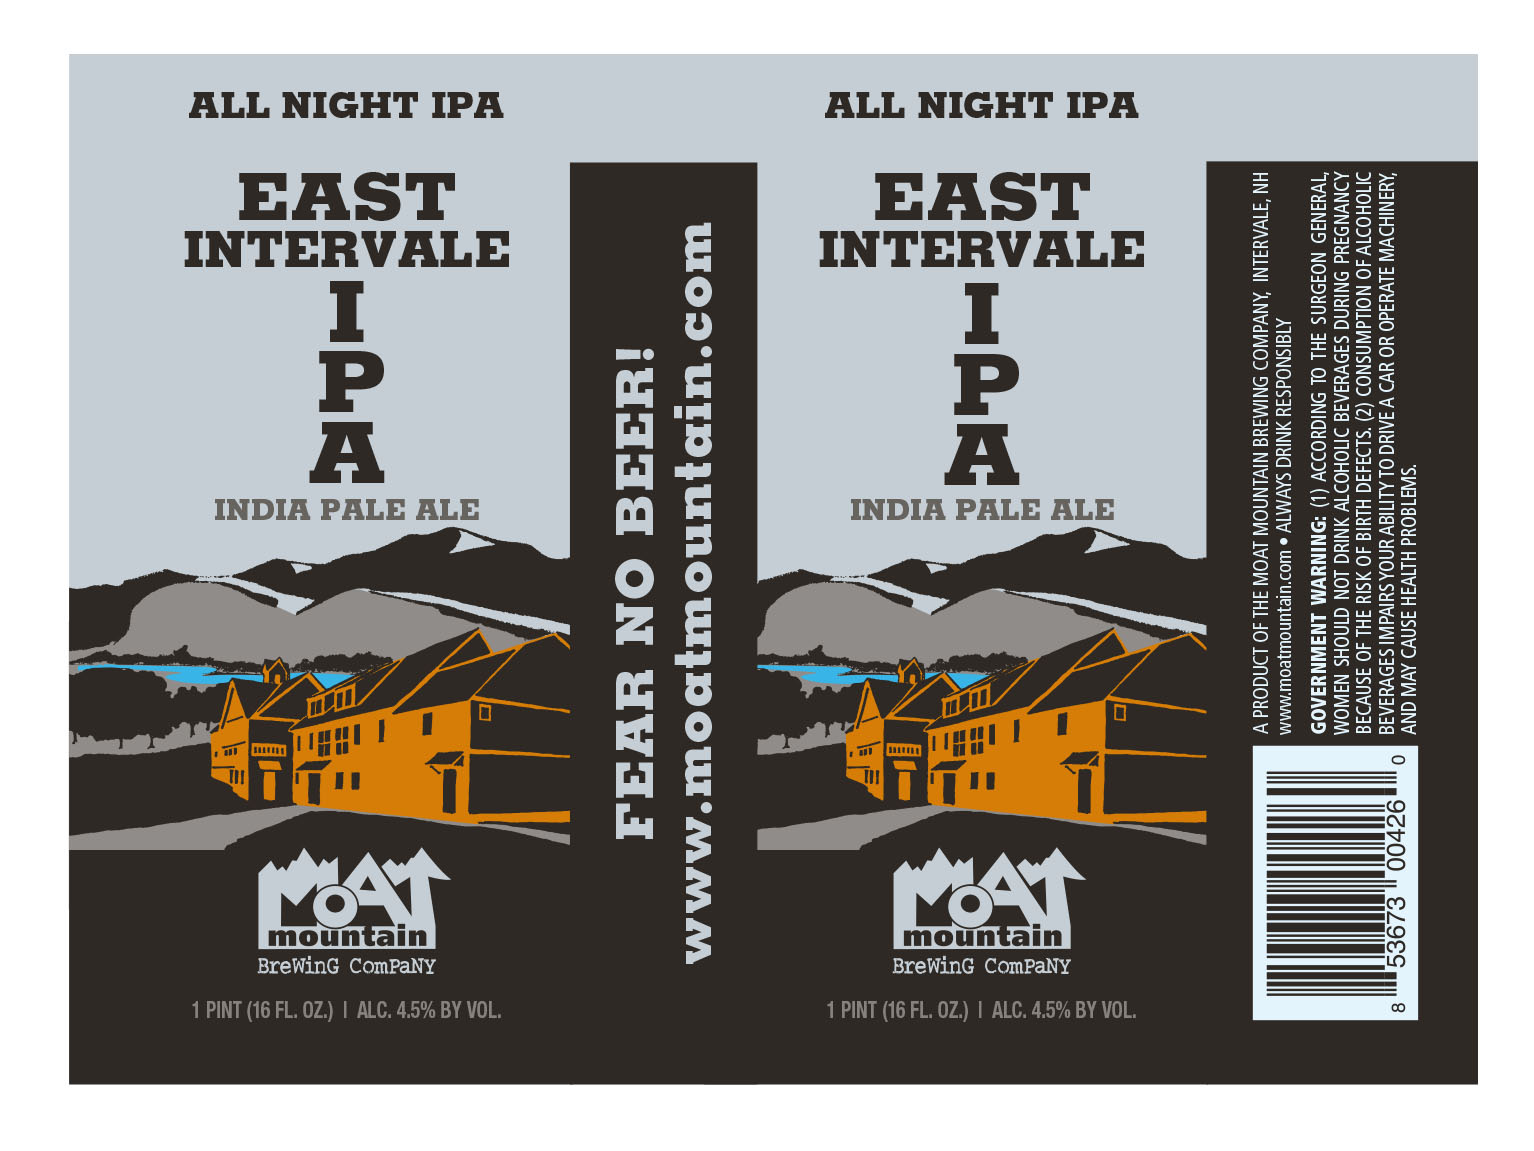 Moat Mountain Brewing Co East Intervale IPA